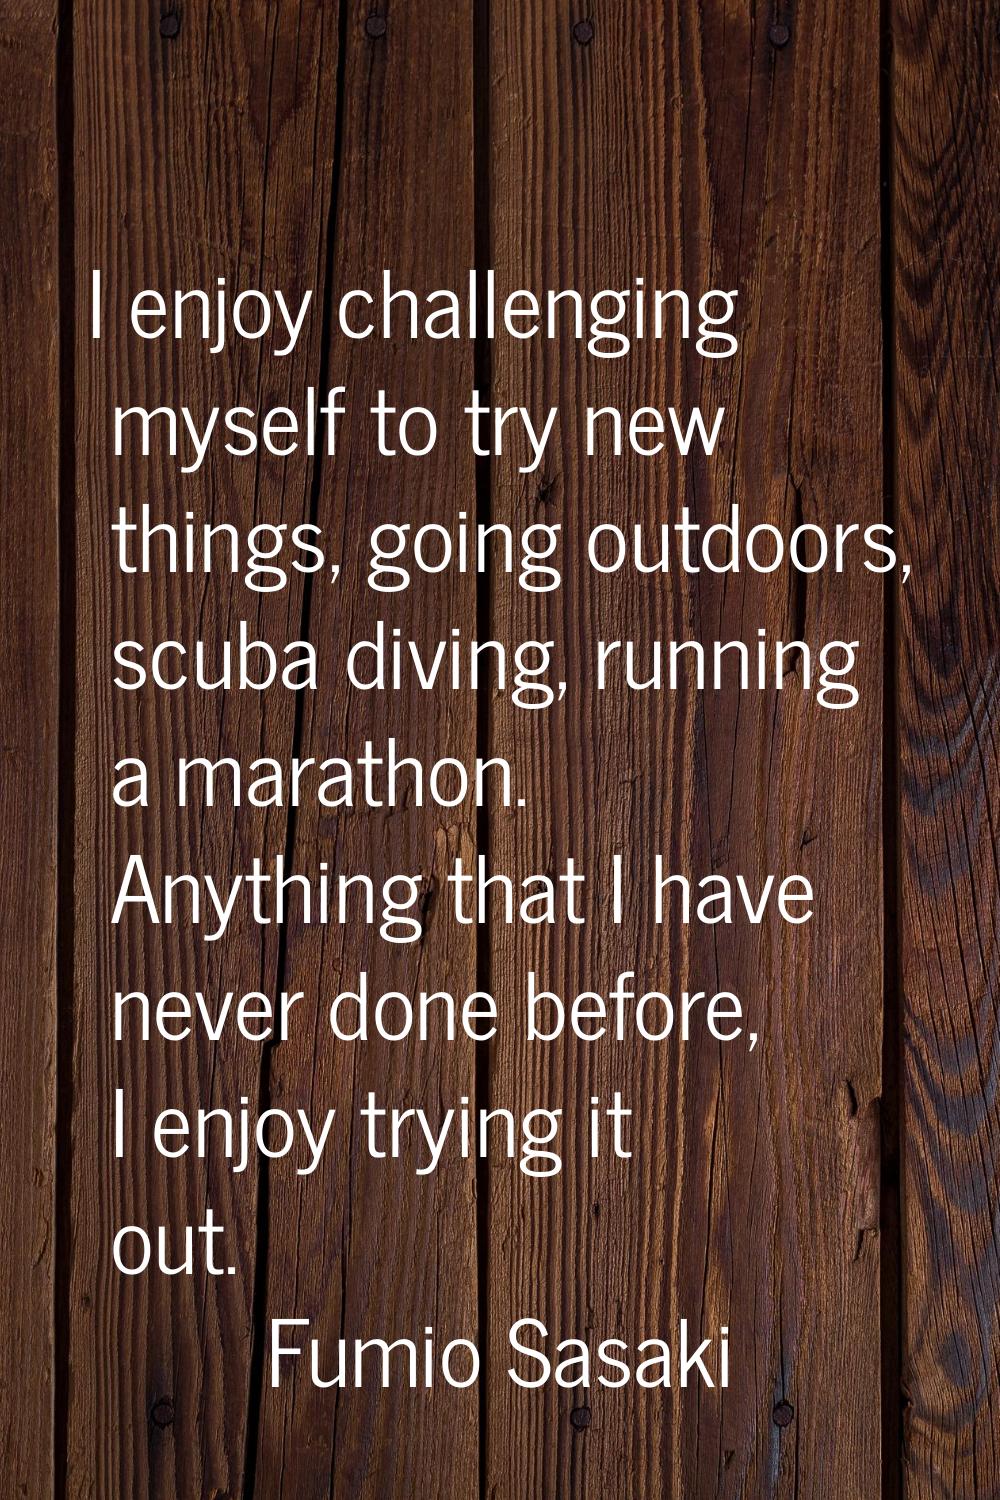 I enjoy challenging myself to try new things, going outdoors, scuba diving, running a marathon. Any